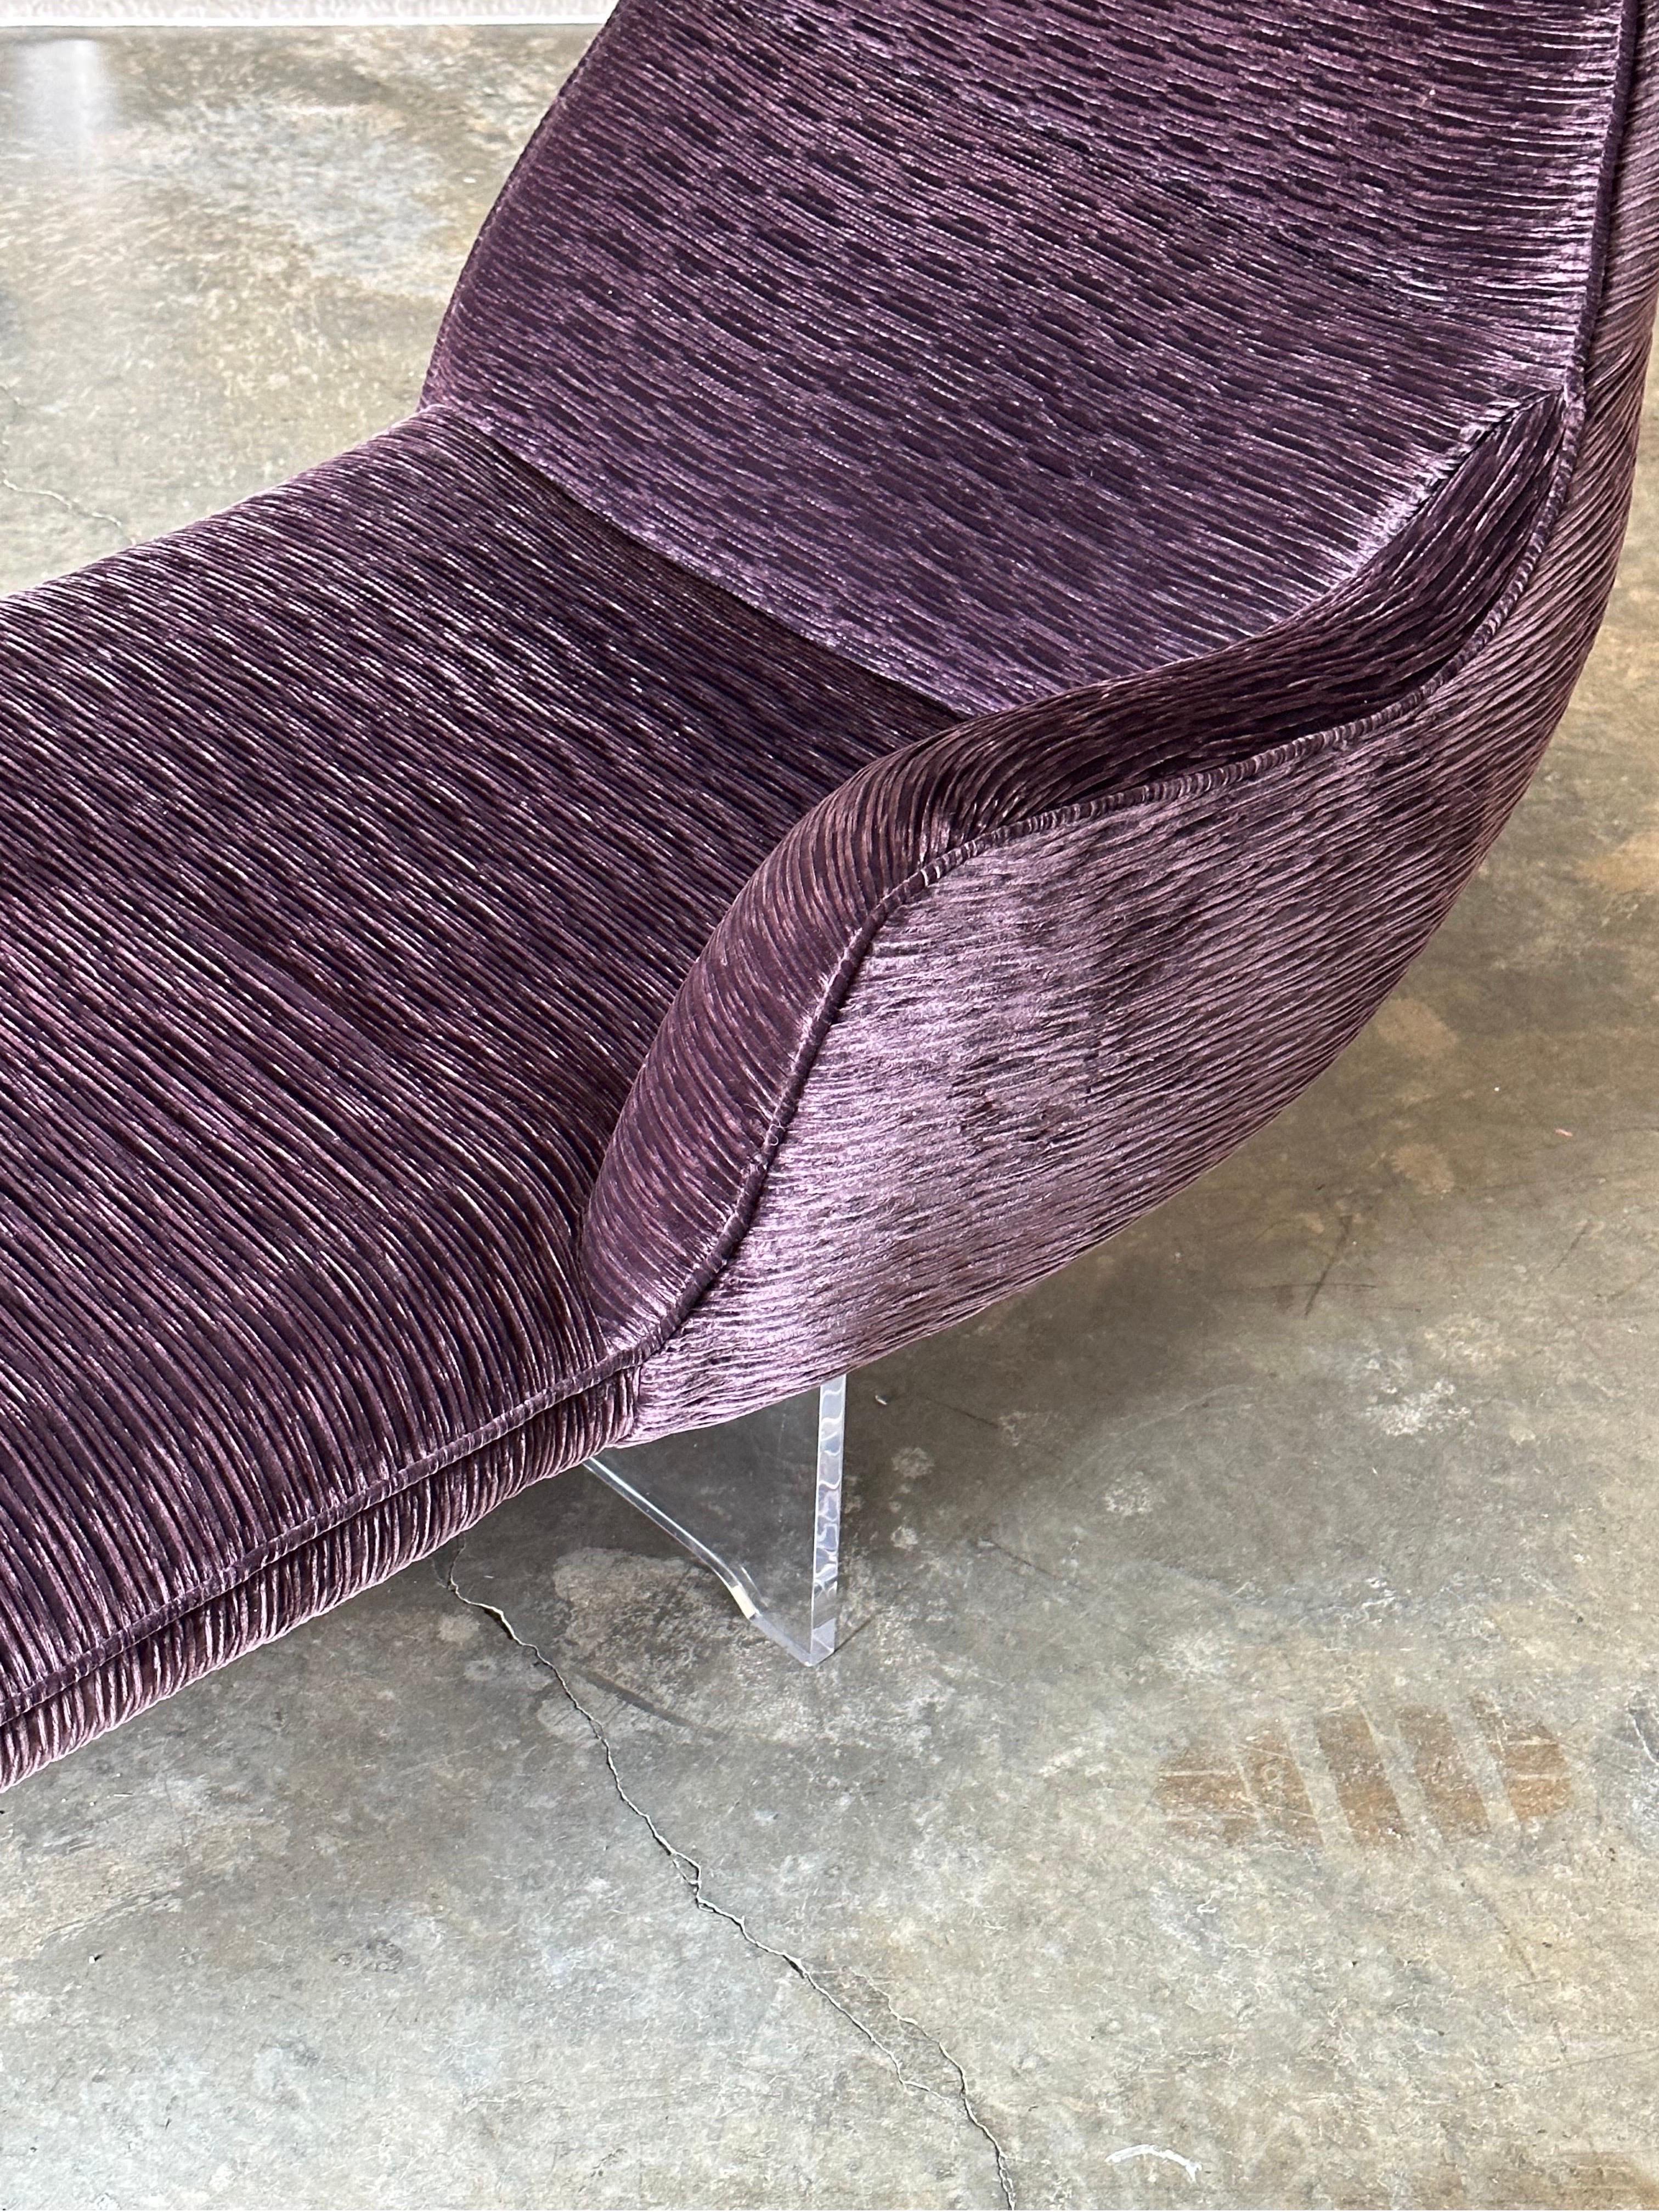 Upholstery Vladimir Kagan “Erica” Chaise With Lucite Base